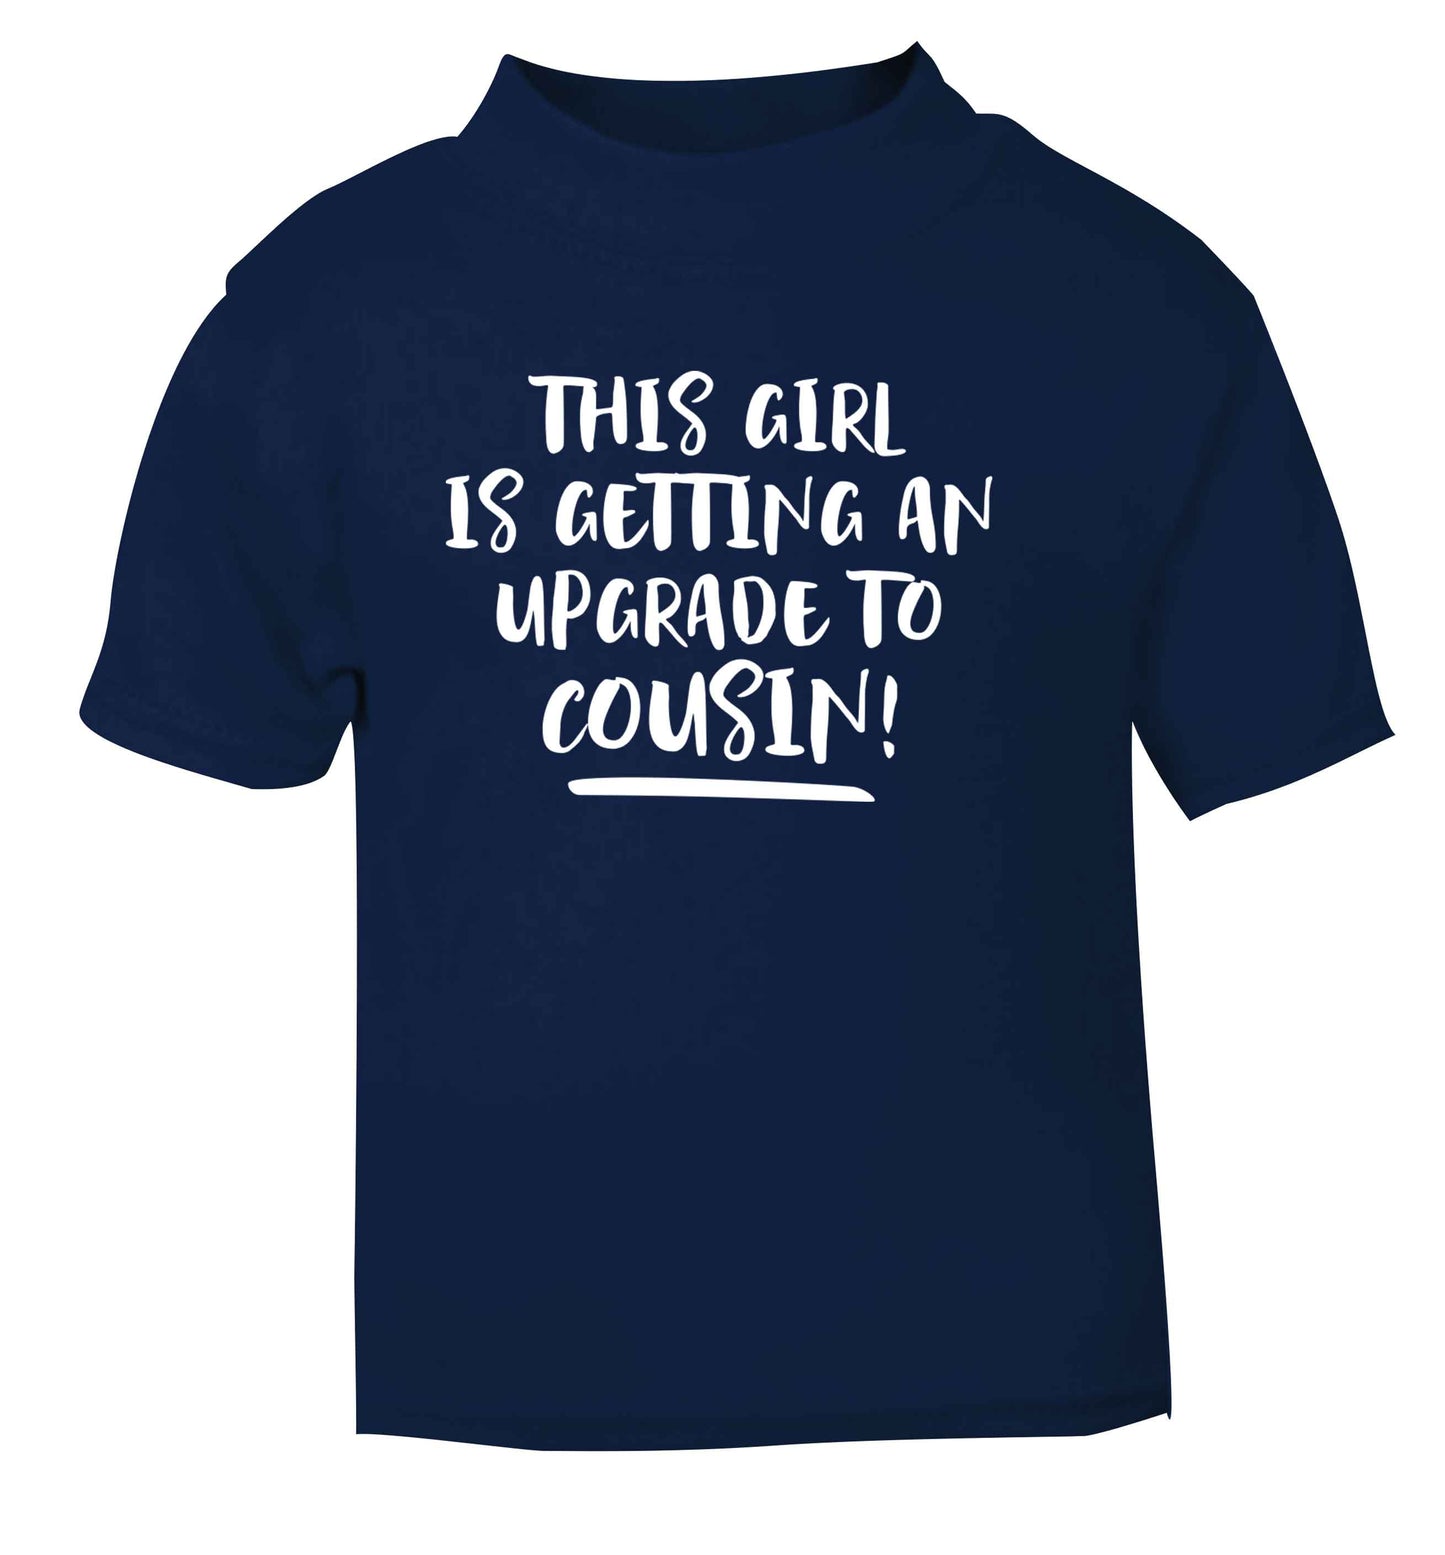 This girl is getting an upgrade to cousin! navy Baby Toddler Tshirt 2 Years